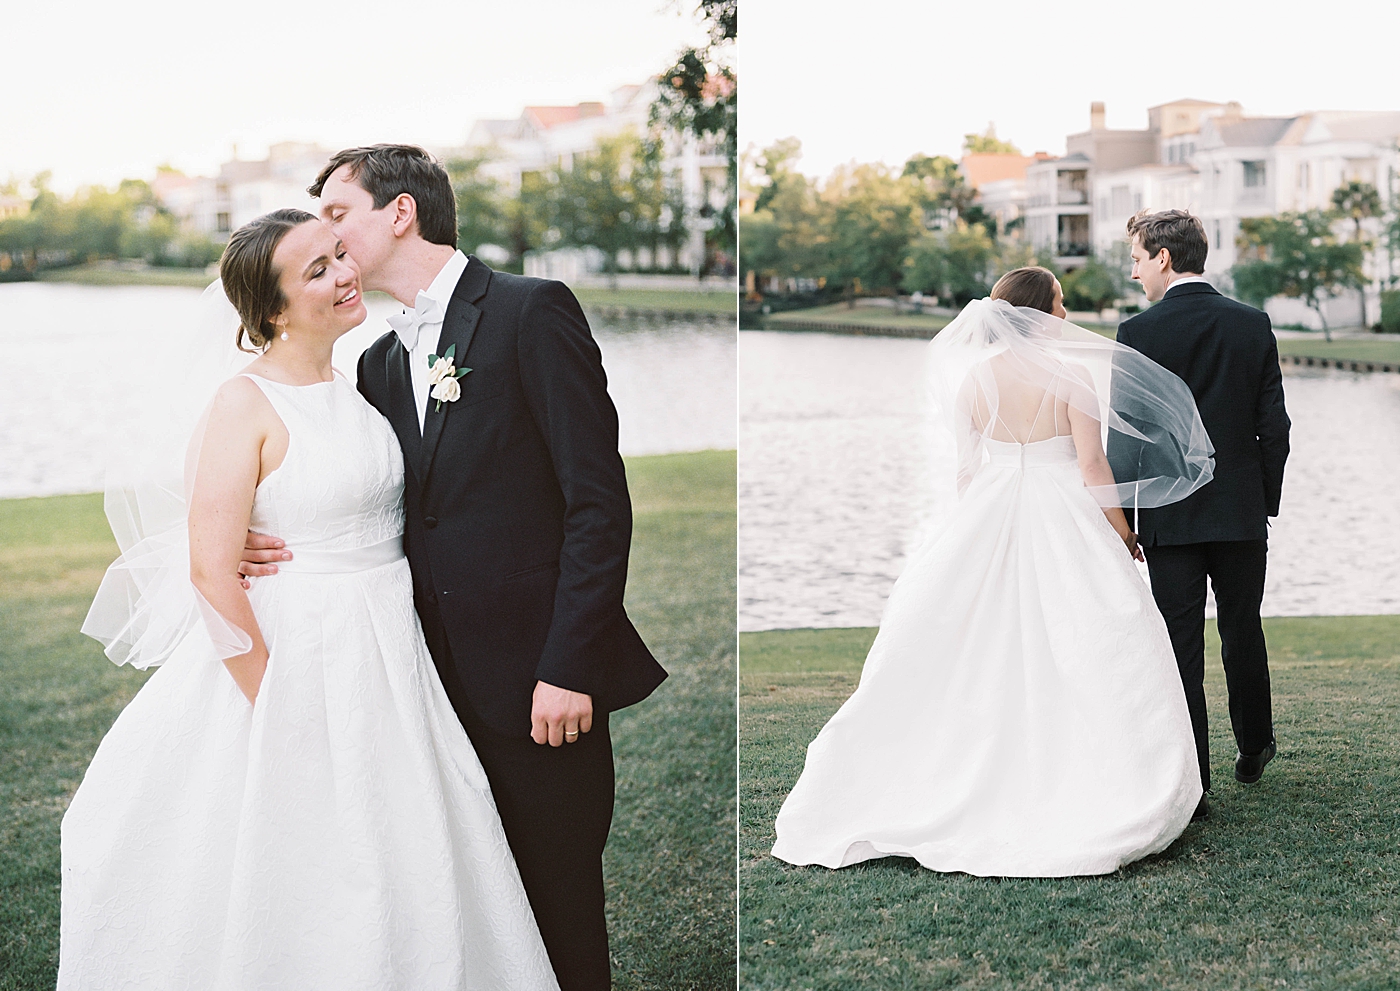 Bride and groom portraits near a pond during their Intimate spring wedding | Carters Event Co